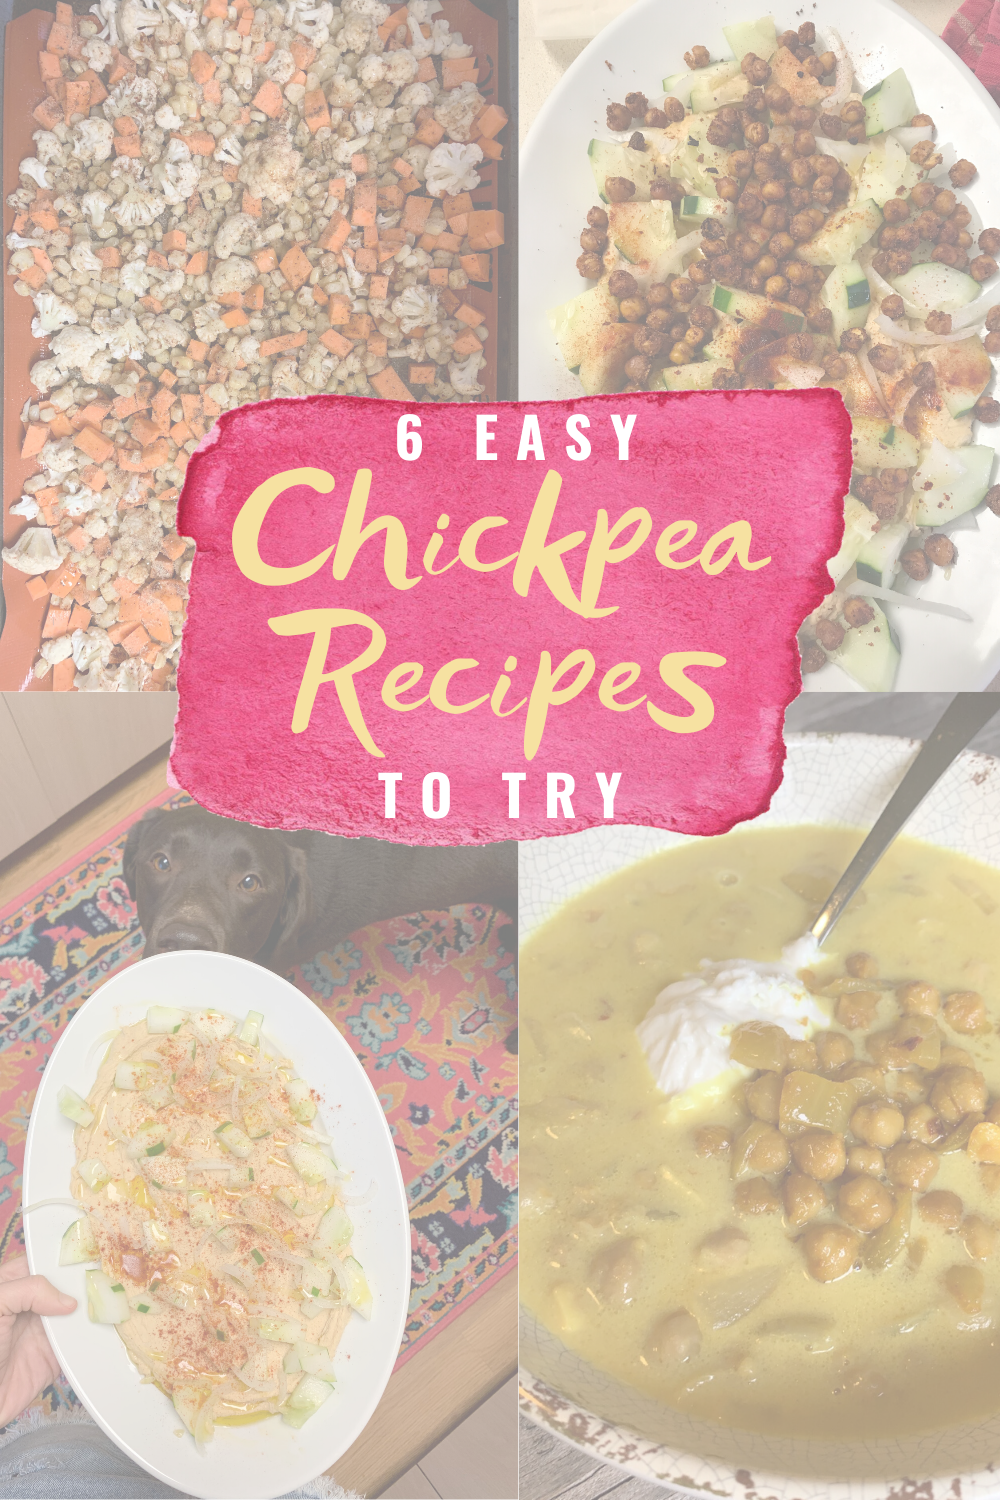 Delicious Recipes That Start With A Can Of Chickpeas - Wondering what chickpea recipes you can make? Here are six delicious recipes to try! | Chickpea Salad Recipe - Chickpea Dishes - Homemade Chickpea Hummus - Can of Chickpeas - Canned Chickpeas